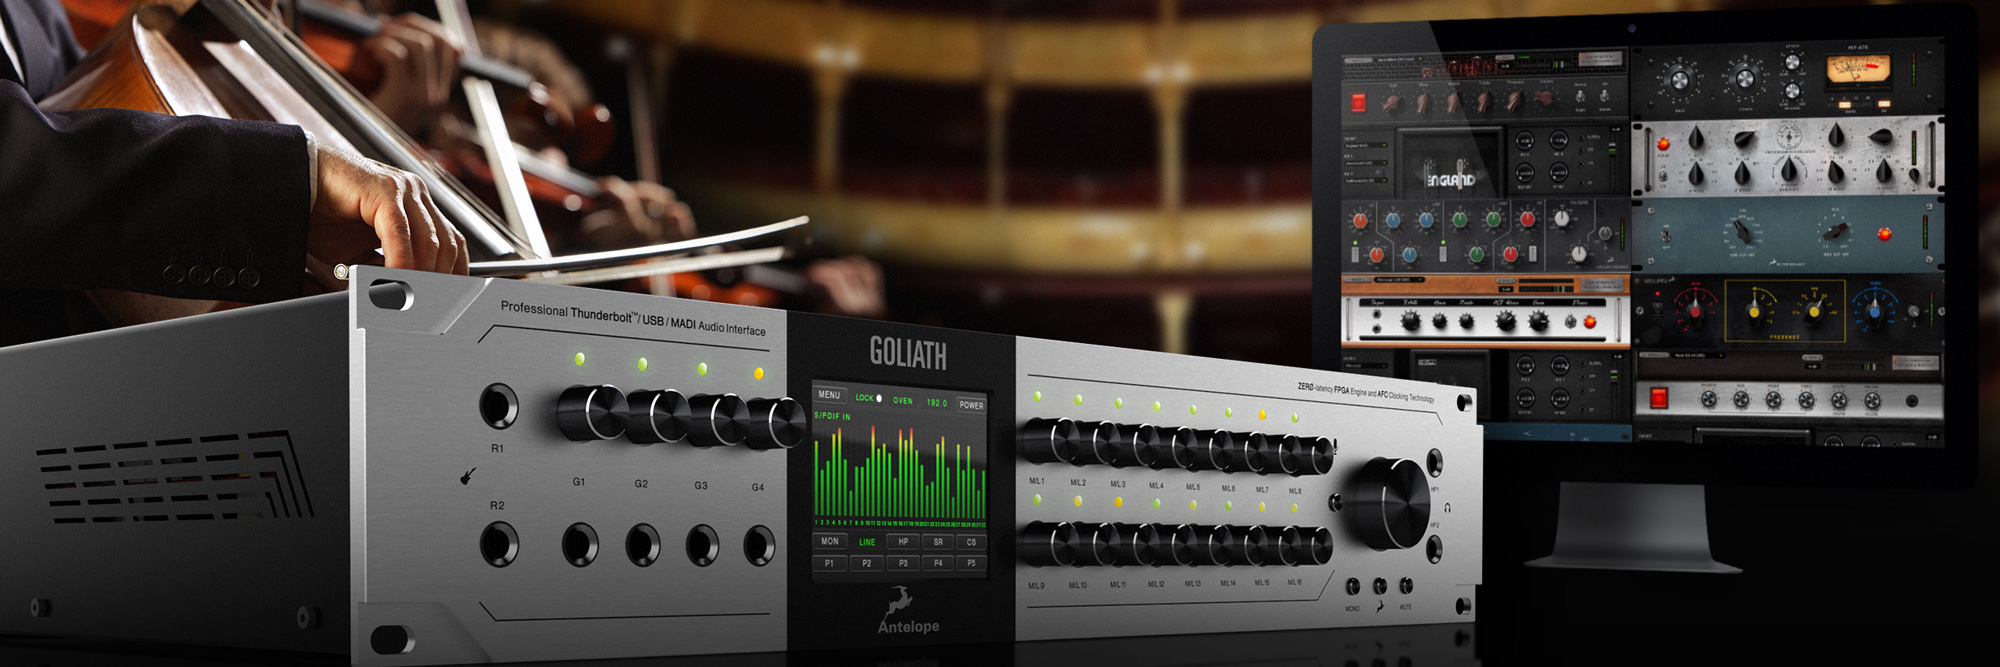 Vintage mic modeling with Goliath’s new Launcher